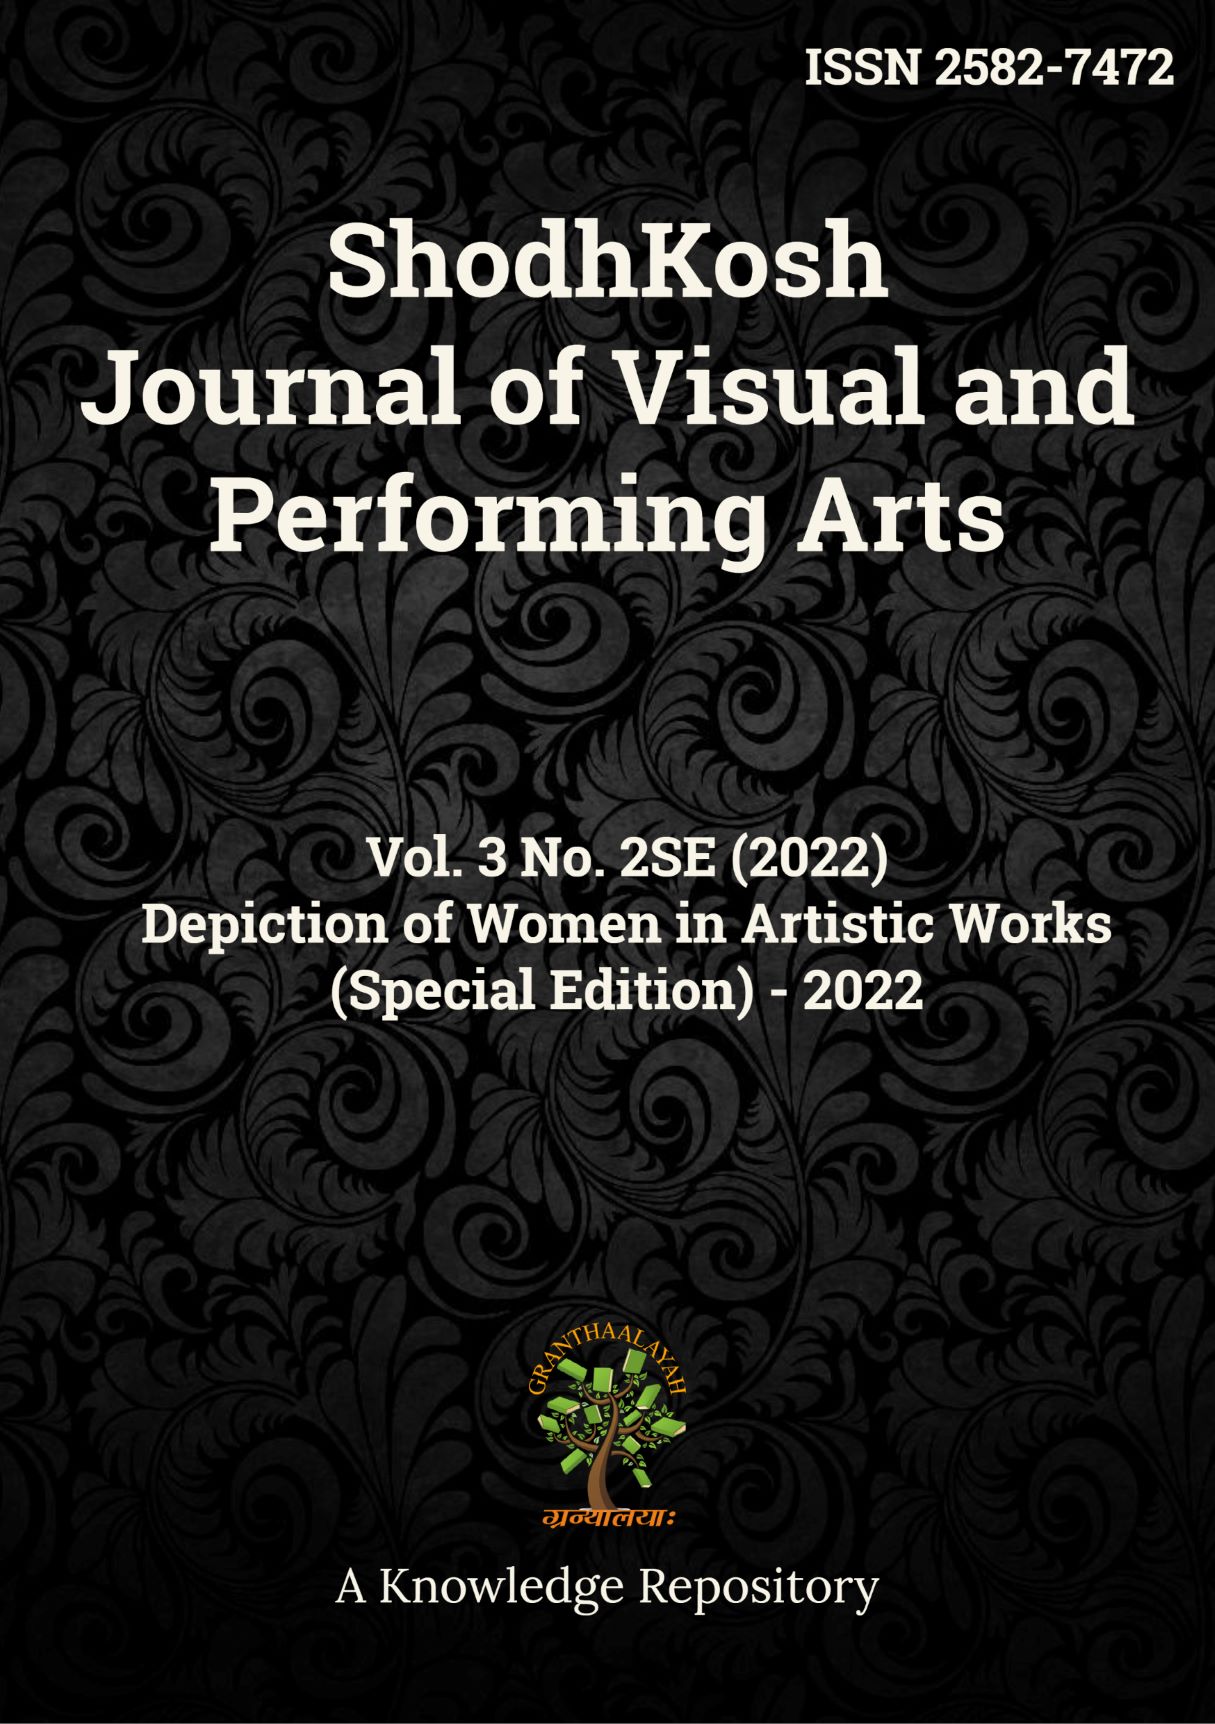 					View Vol. 3 No. 2SE (2022): Depiction of Women in Artistic Works
				